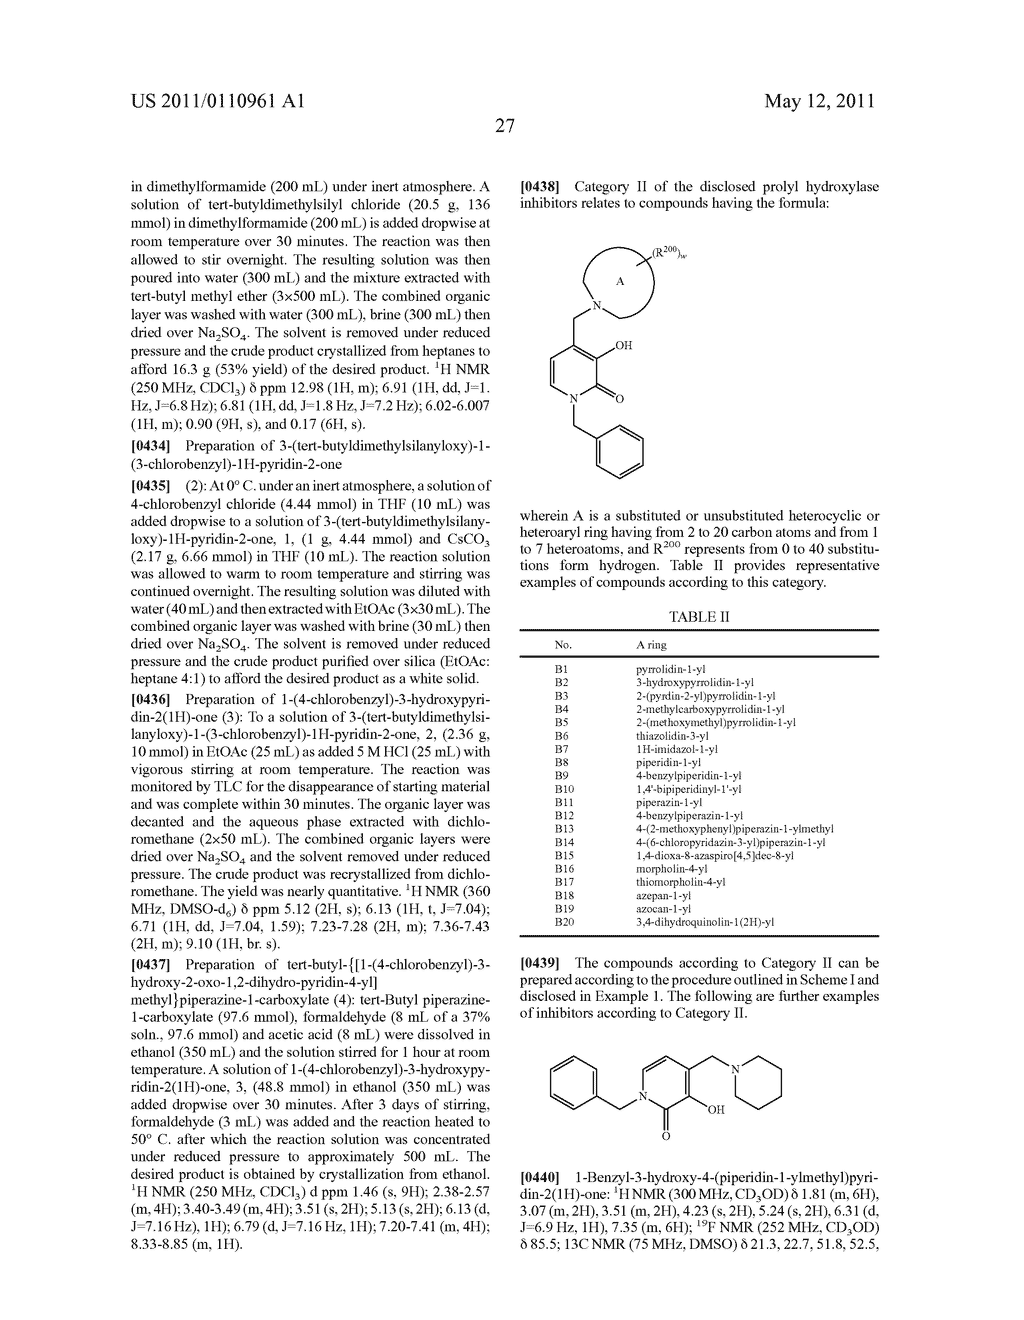 PROLYL HYDROXYLASE INHIBITORS - diagram, schematic, and image 42